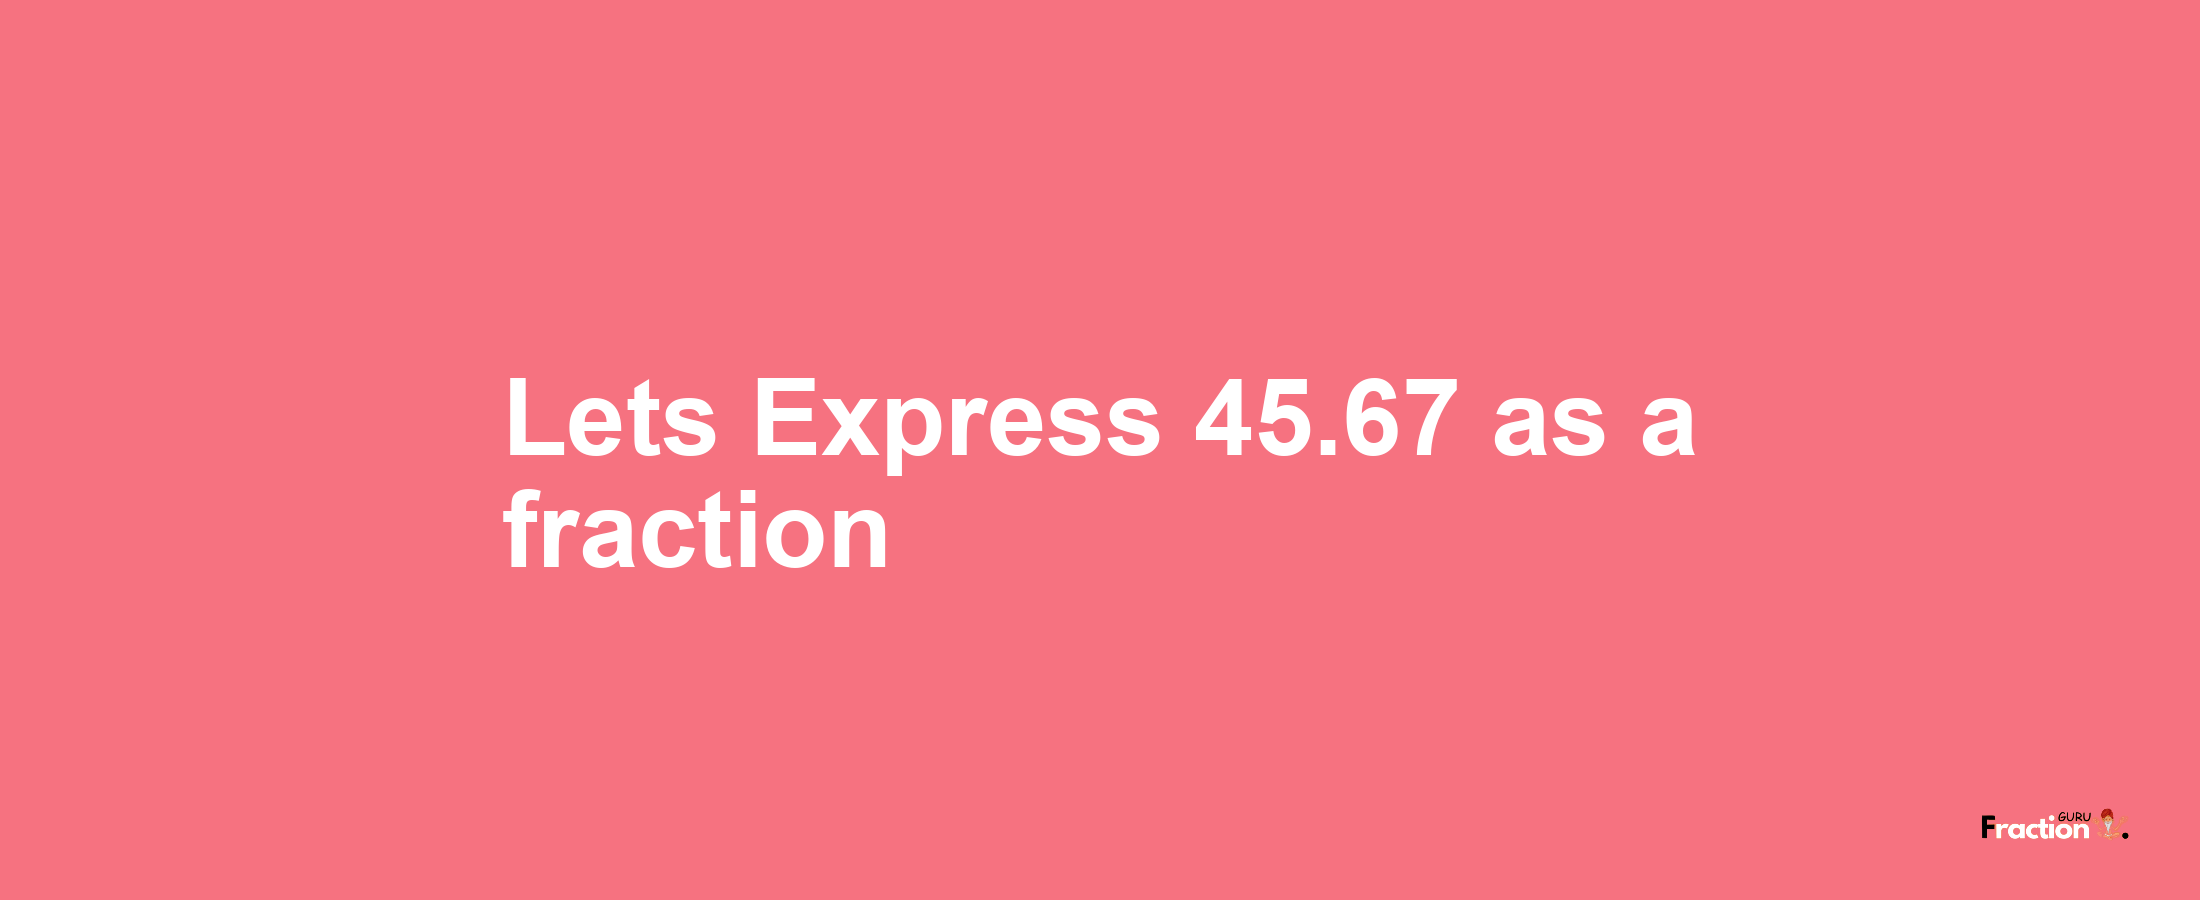 Lets Express 45.67 as afraction